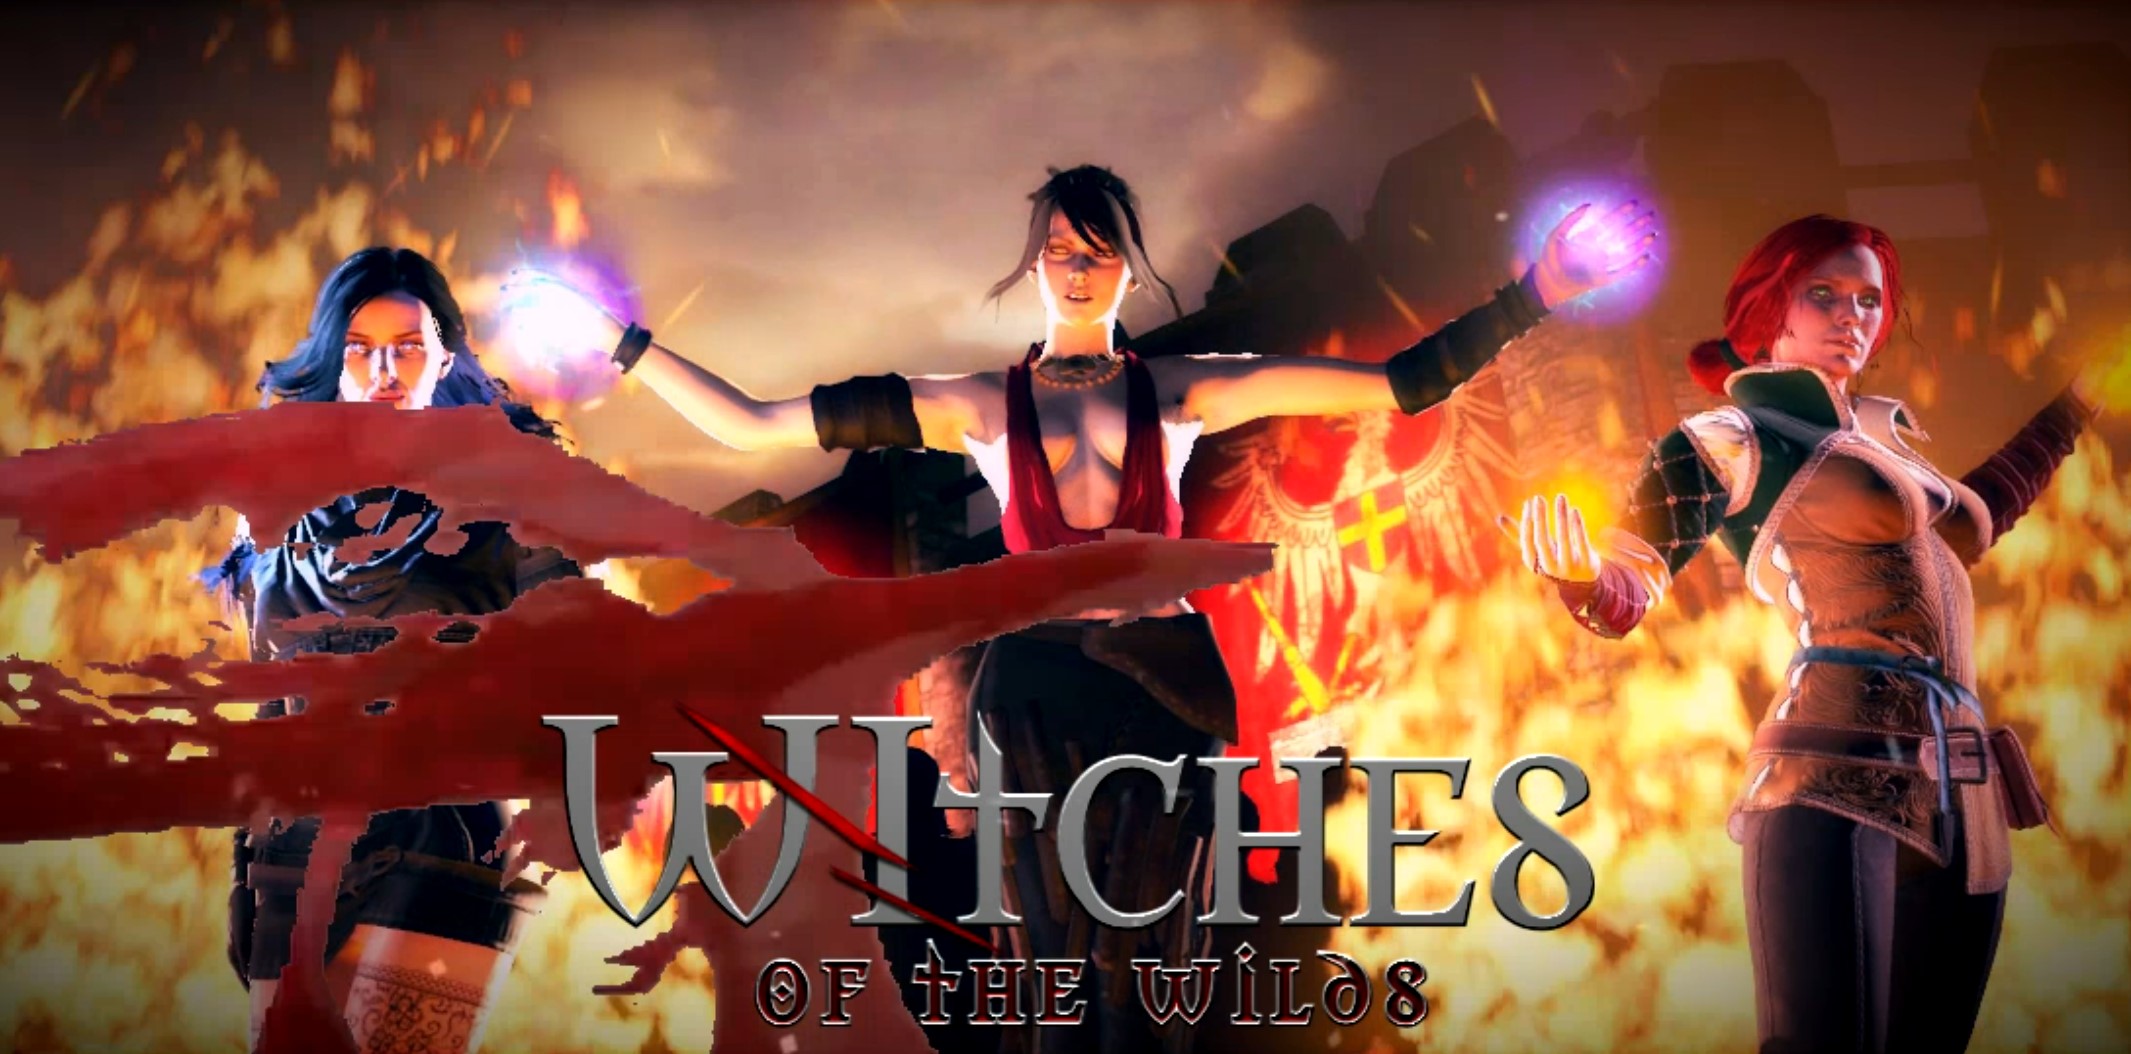 Witches of the Wilds Episode 1